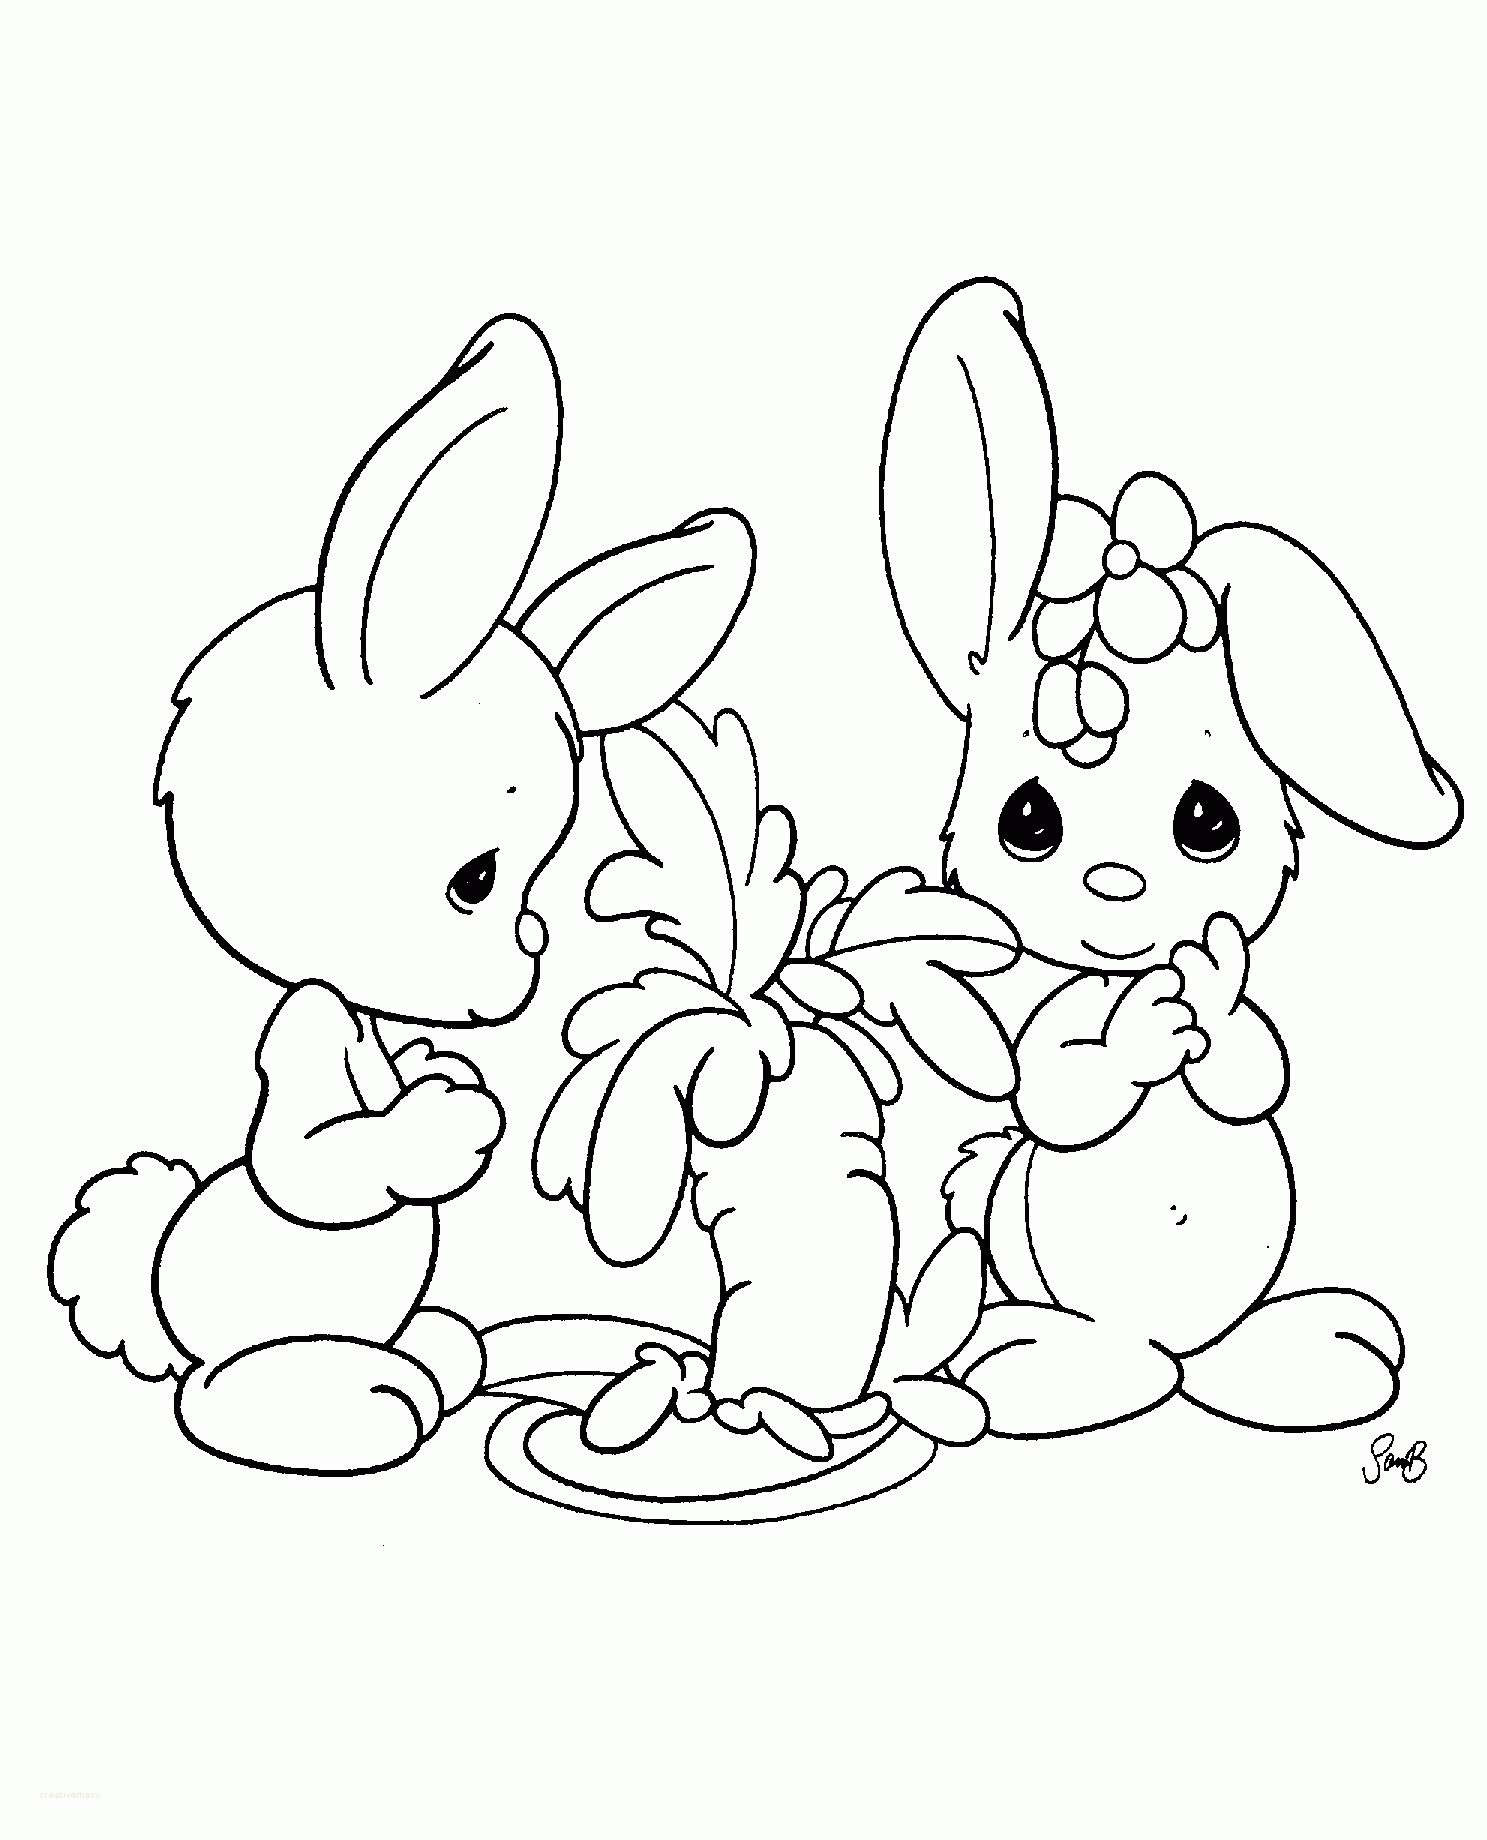 Bunny Coloring Pages Printable
 Awesome 15 Cute Easter Bunny Coloring Pages Printable